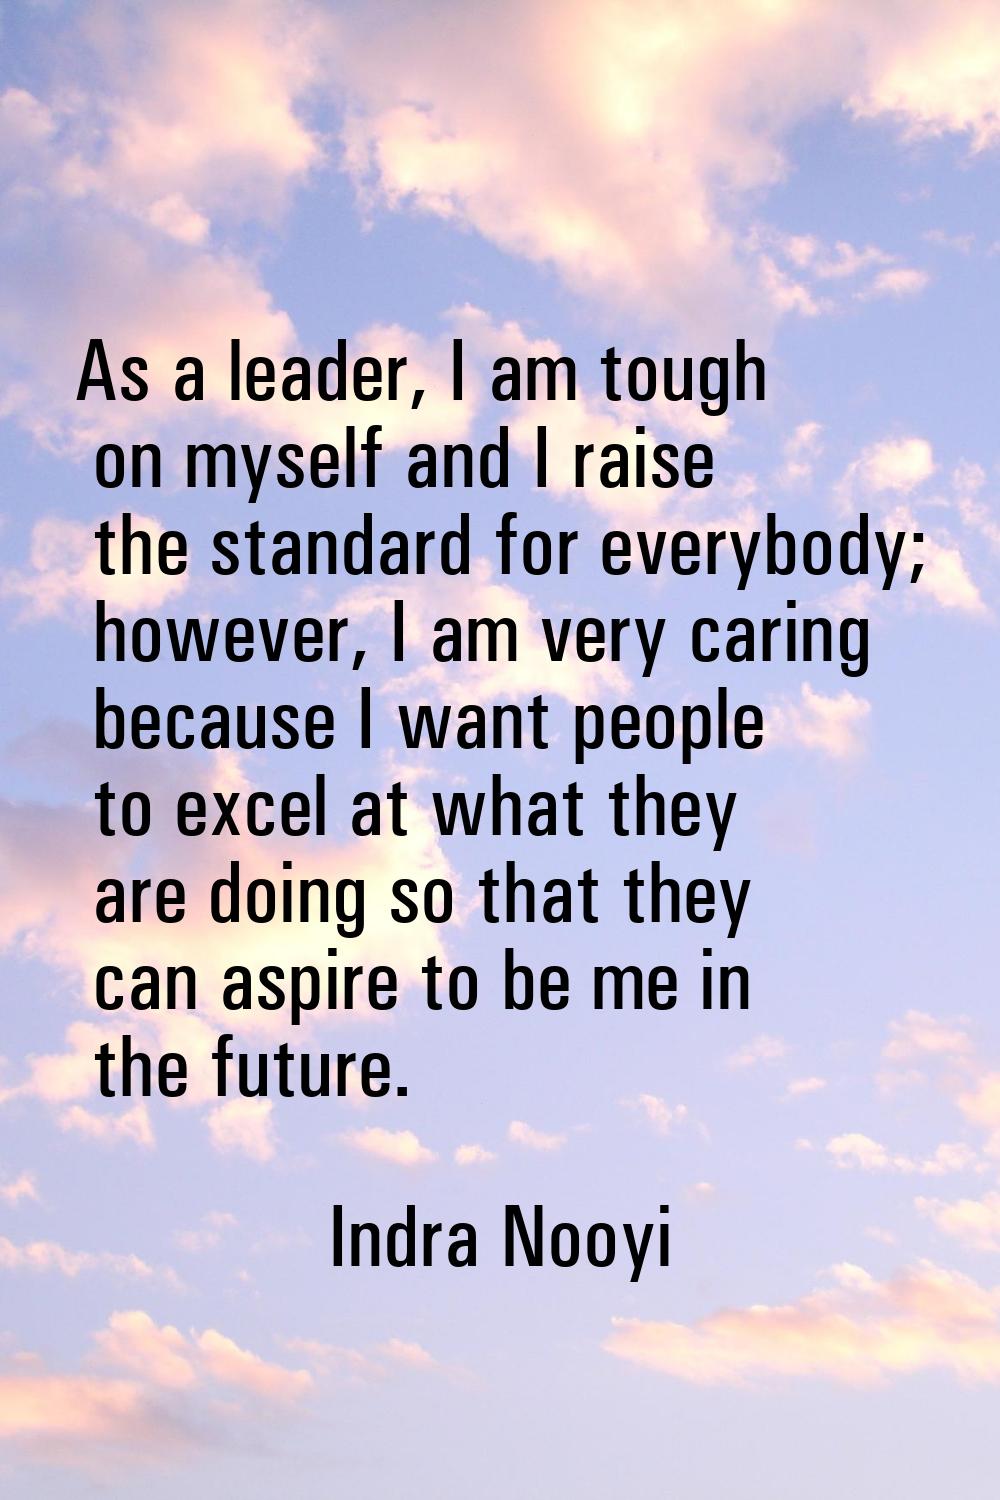 As a leader, I am tough on myself and I raise the standard for everybody; however, I am very caring